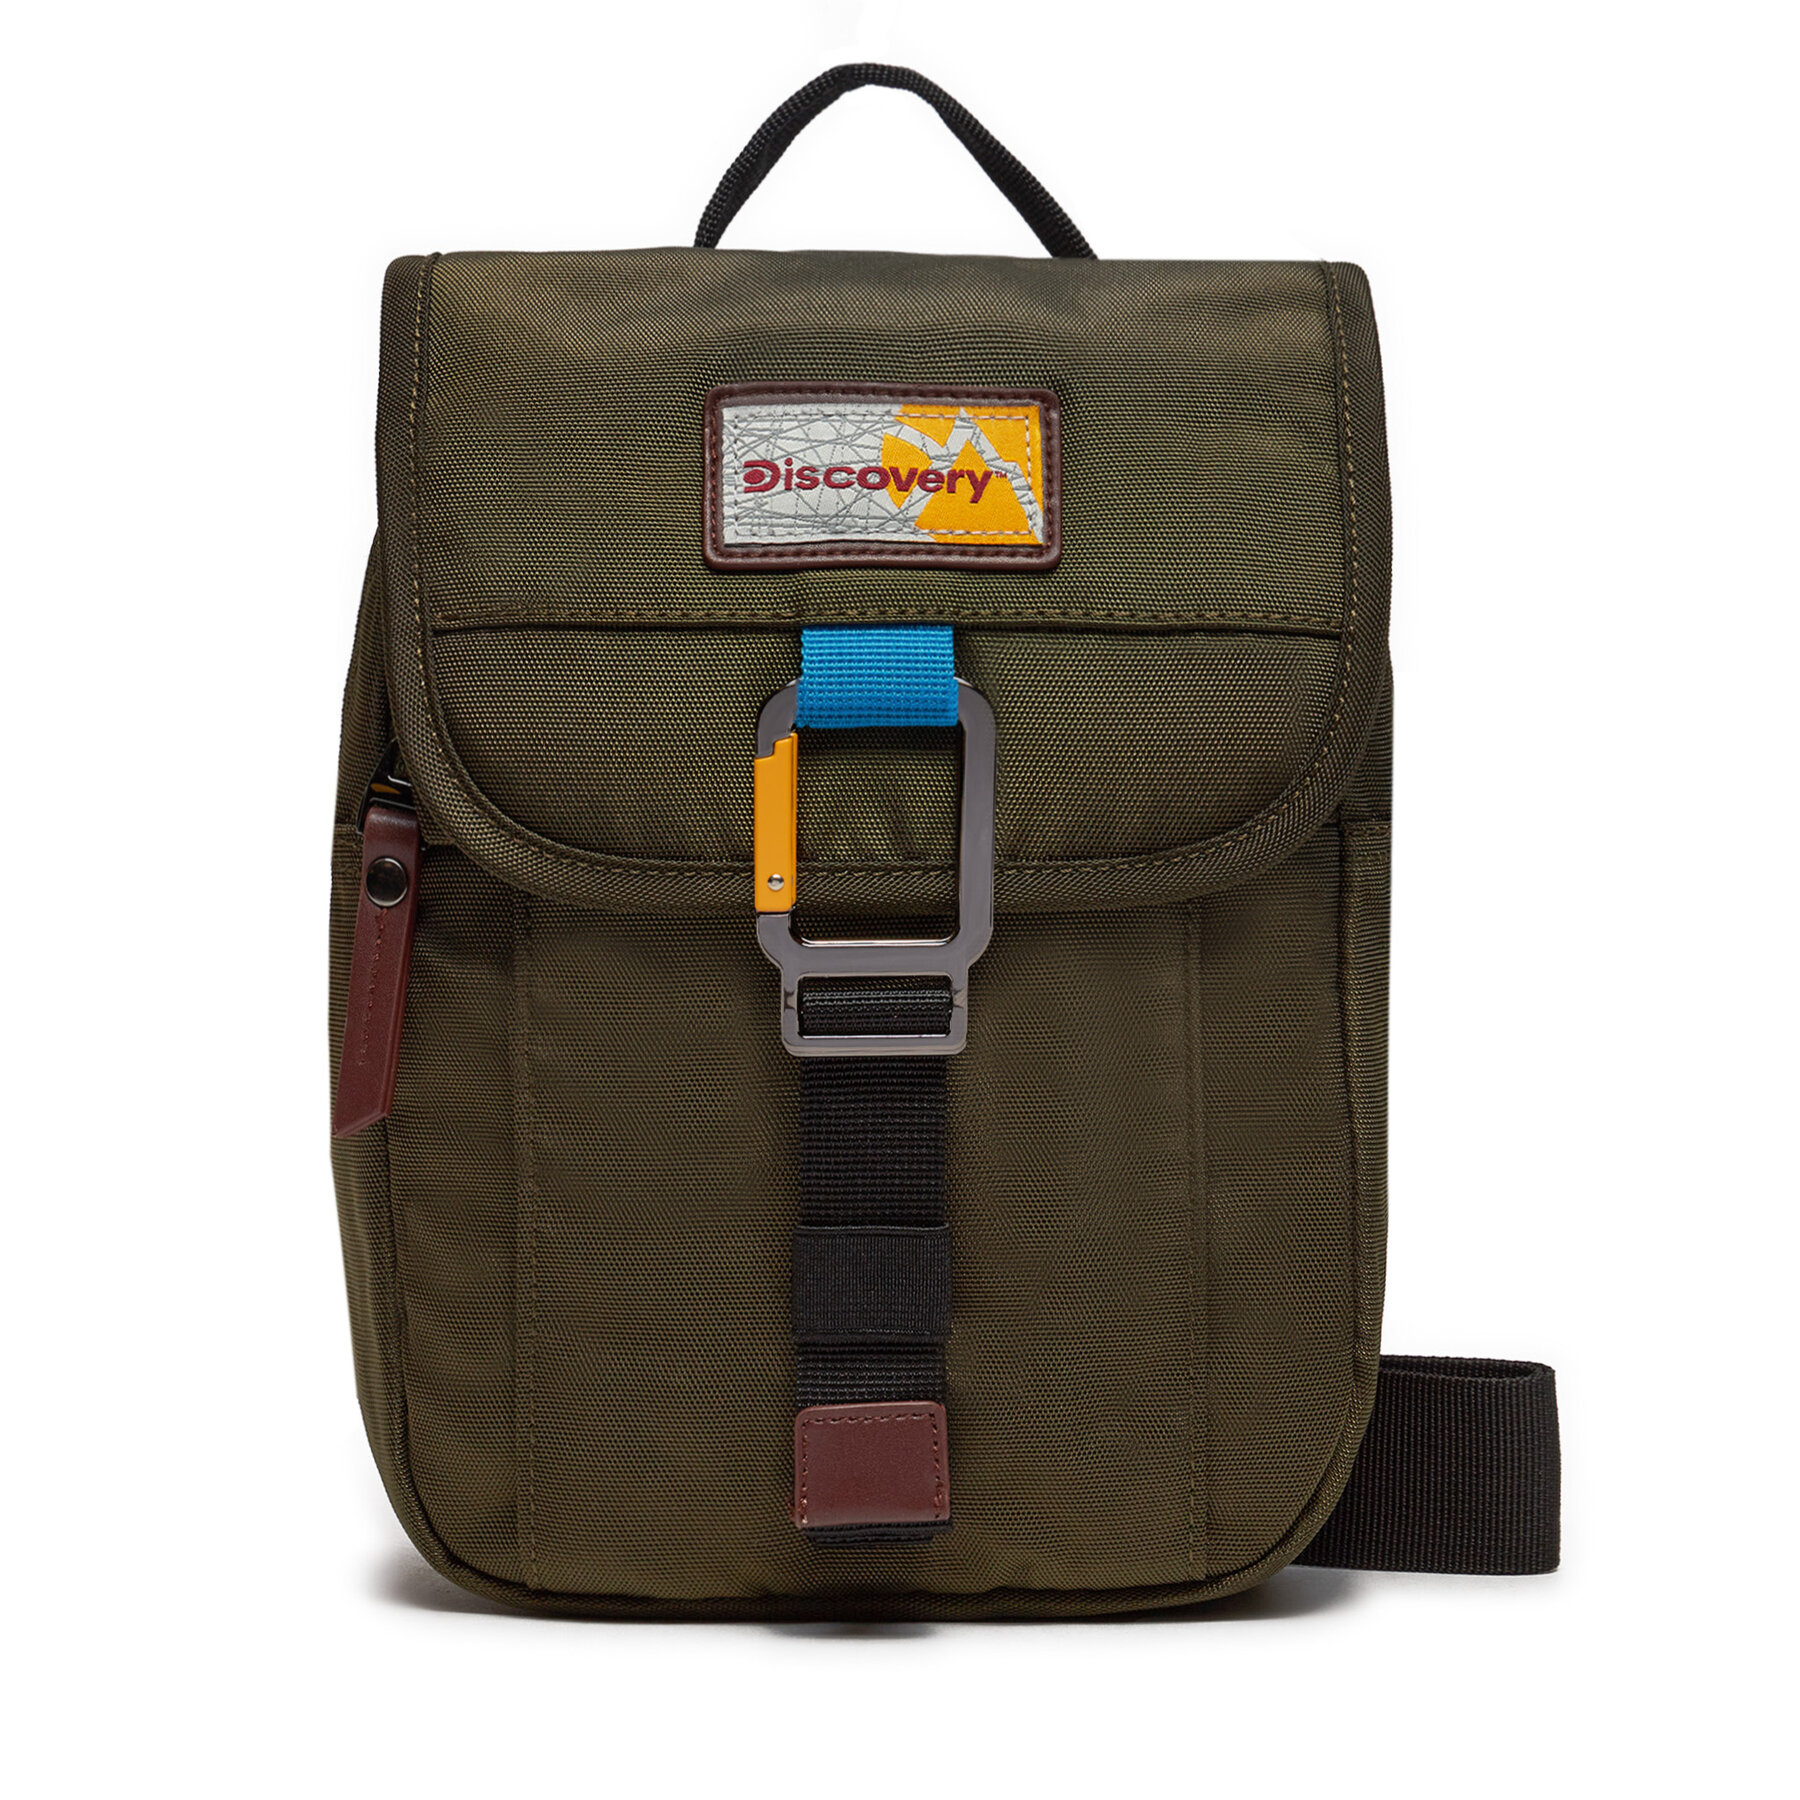 Umhängetasche Discovery Utility With Flap D00711.11 Khaki von Discovery